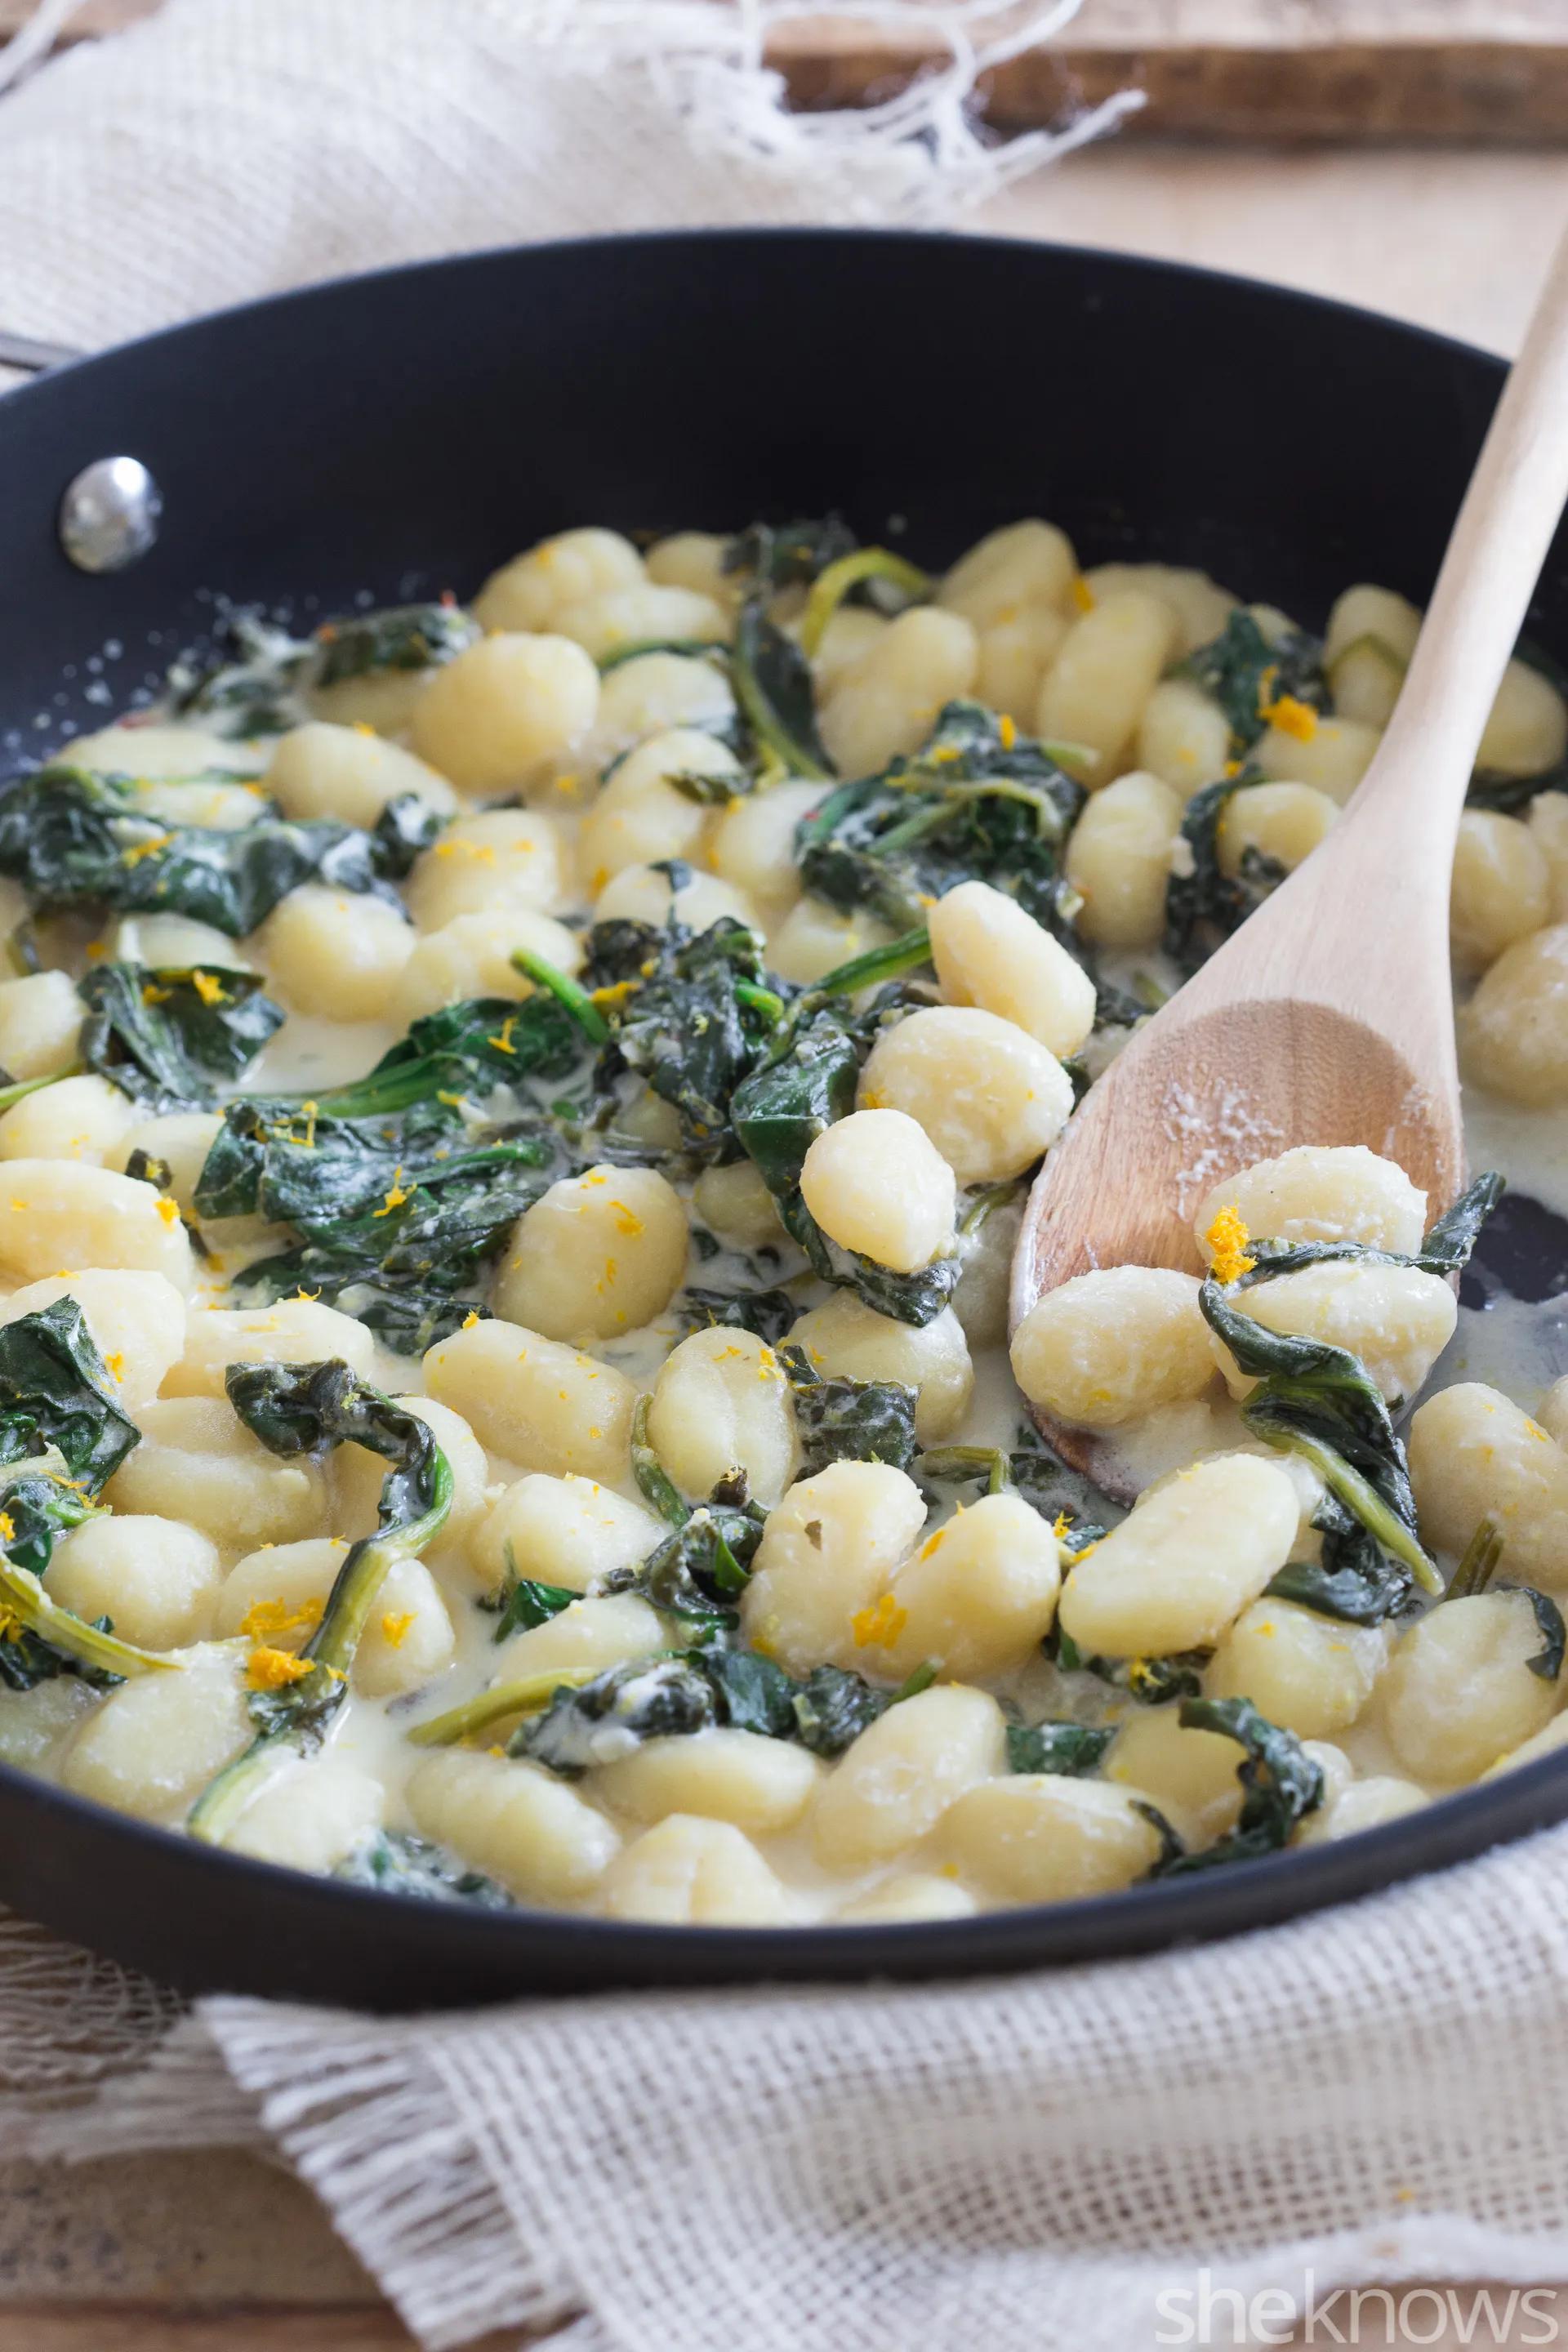 Meatless Monday: Creamy lemon-ricotta gnocchi with spinach – SheKnows